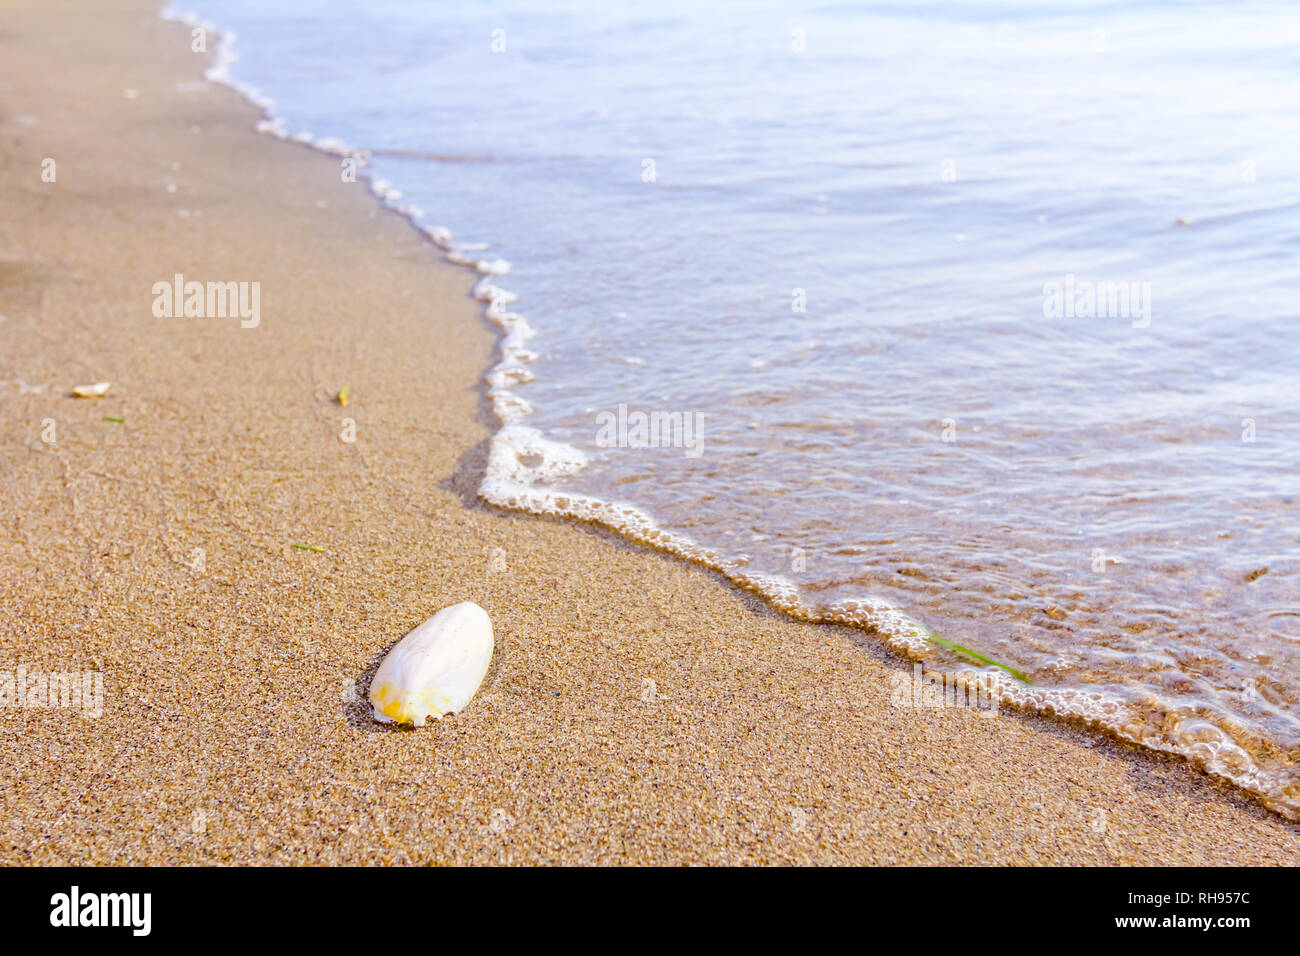 Cuttlebone is washed up by the sea on sandy beach. Stock Photo